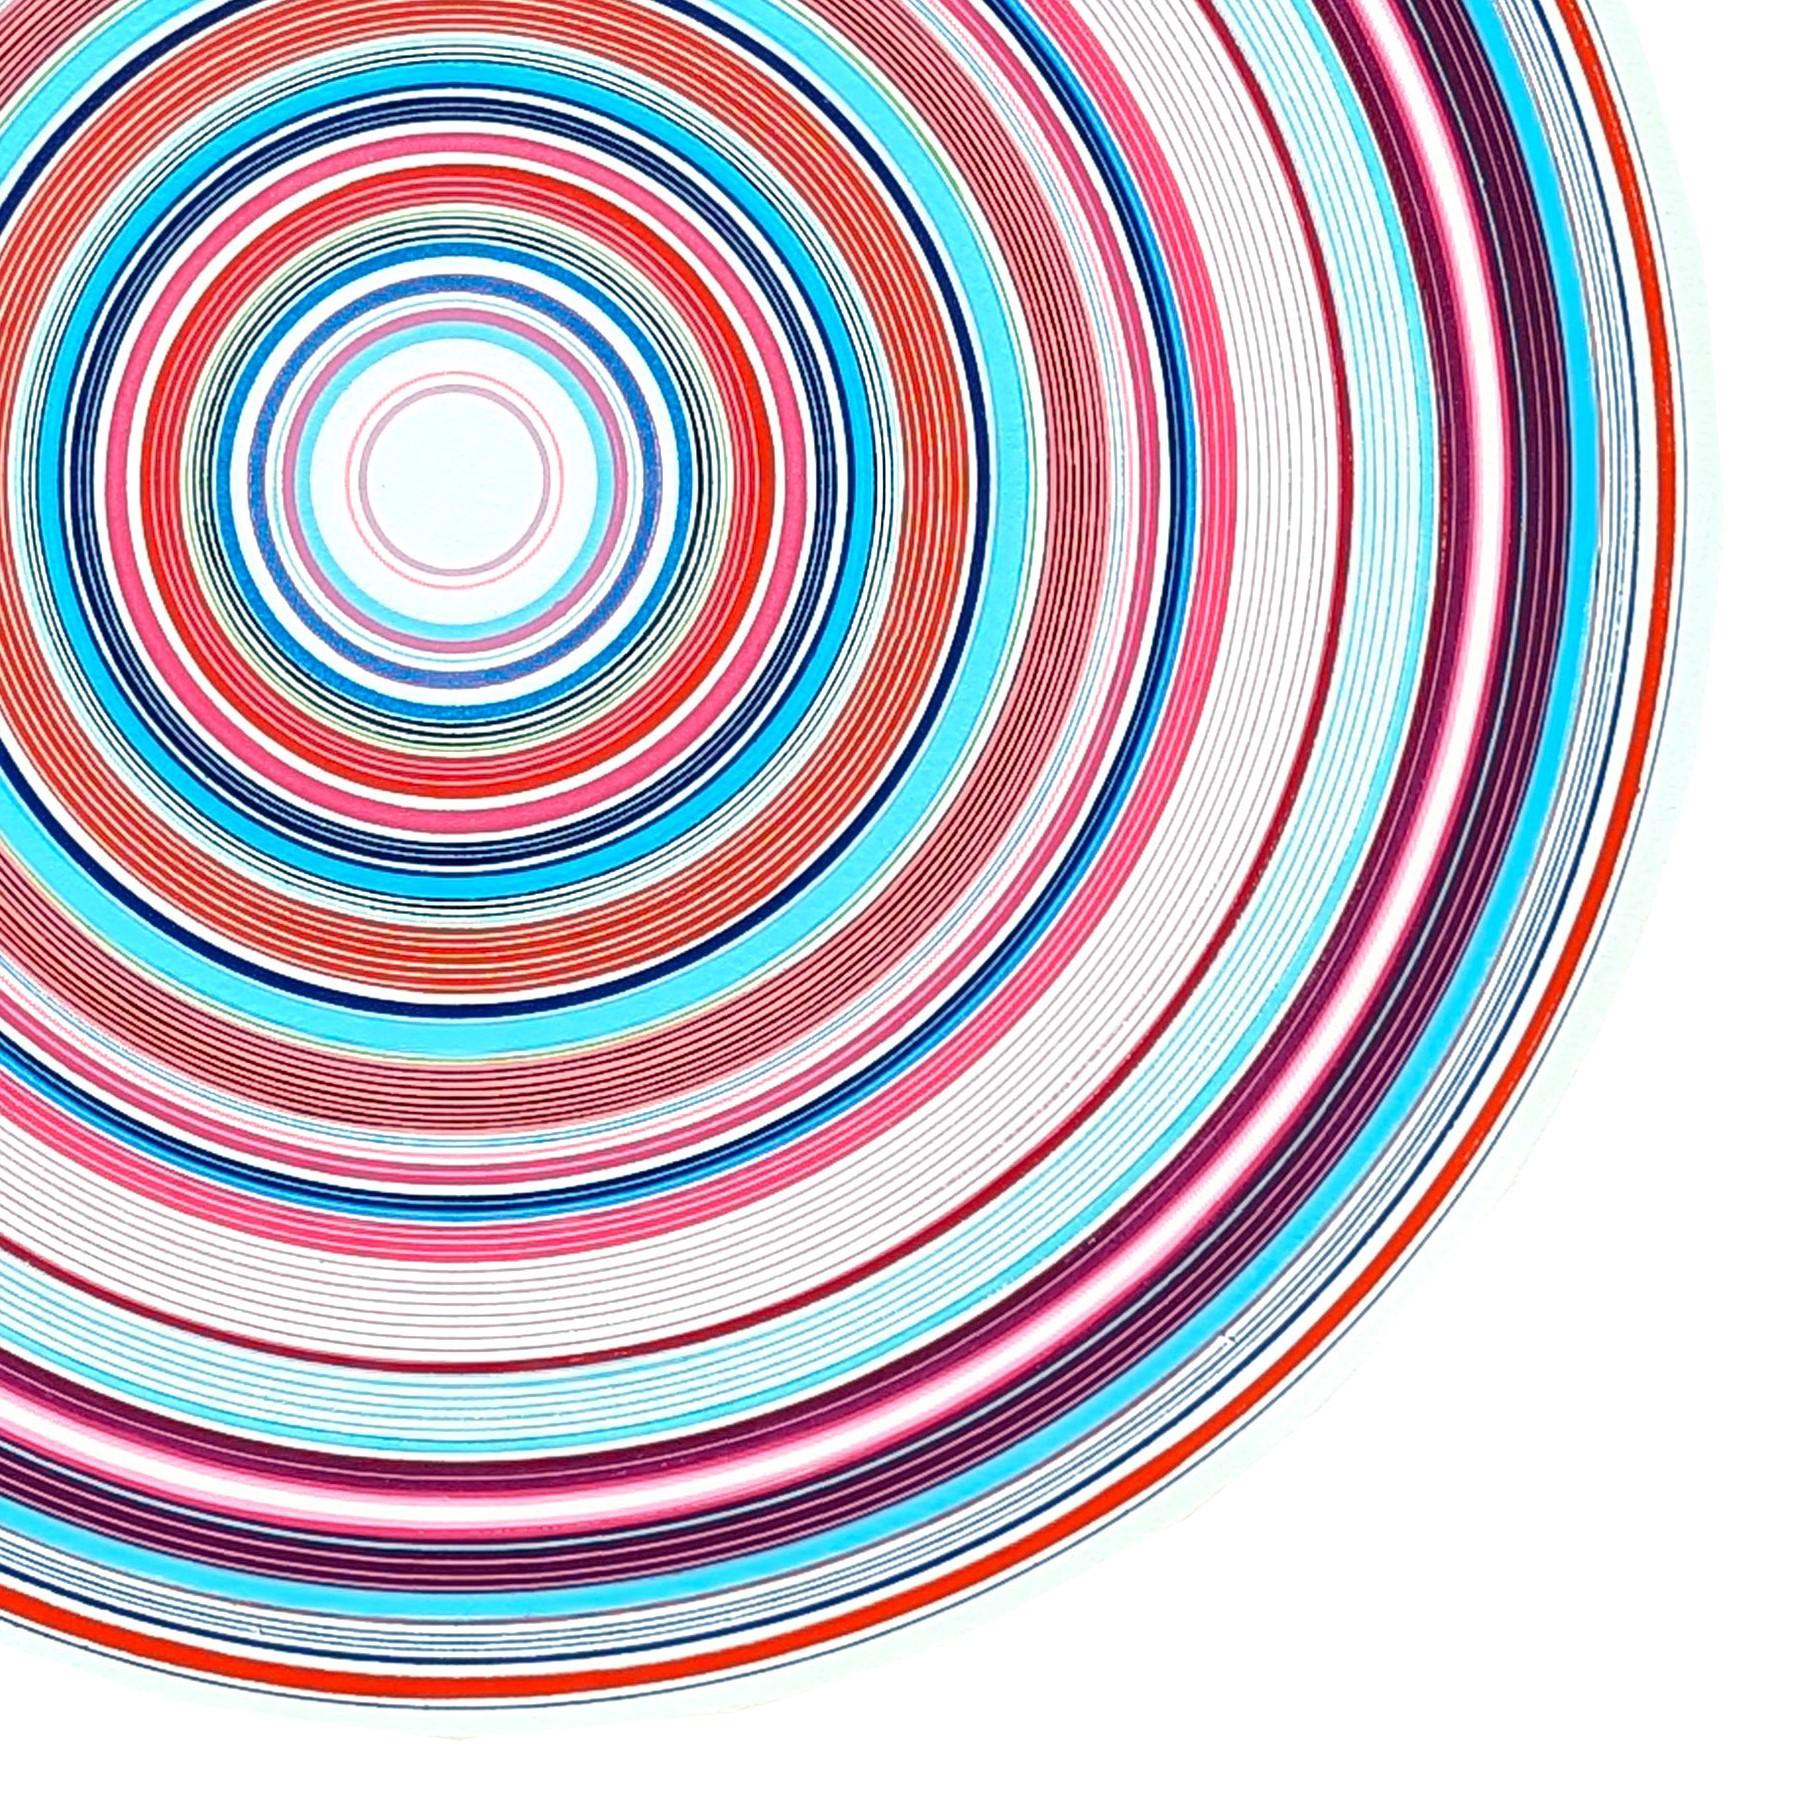 “Midnight Sun” Contemporary Pink, Blue, and Red Concentric Circle Painting 1